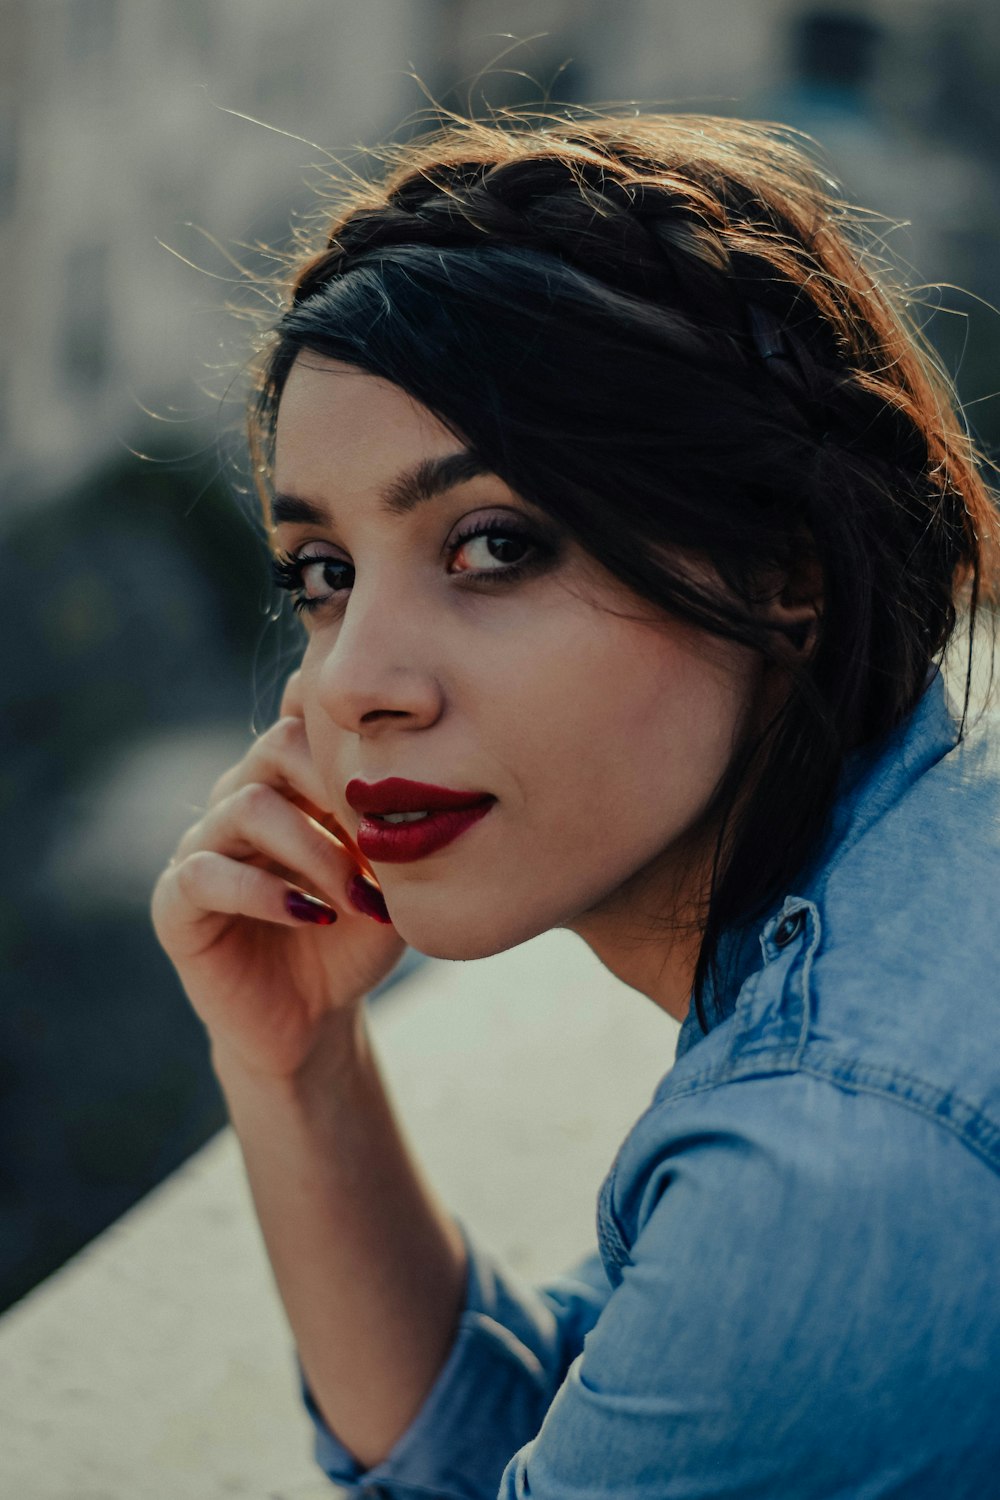 a woman with dark hair and red lipstick